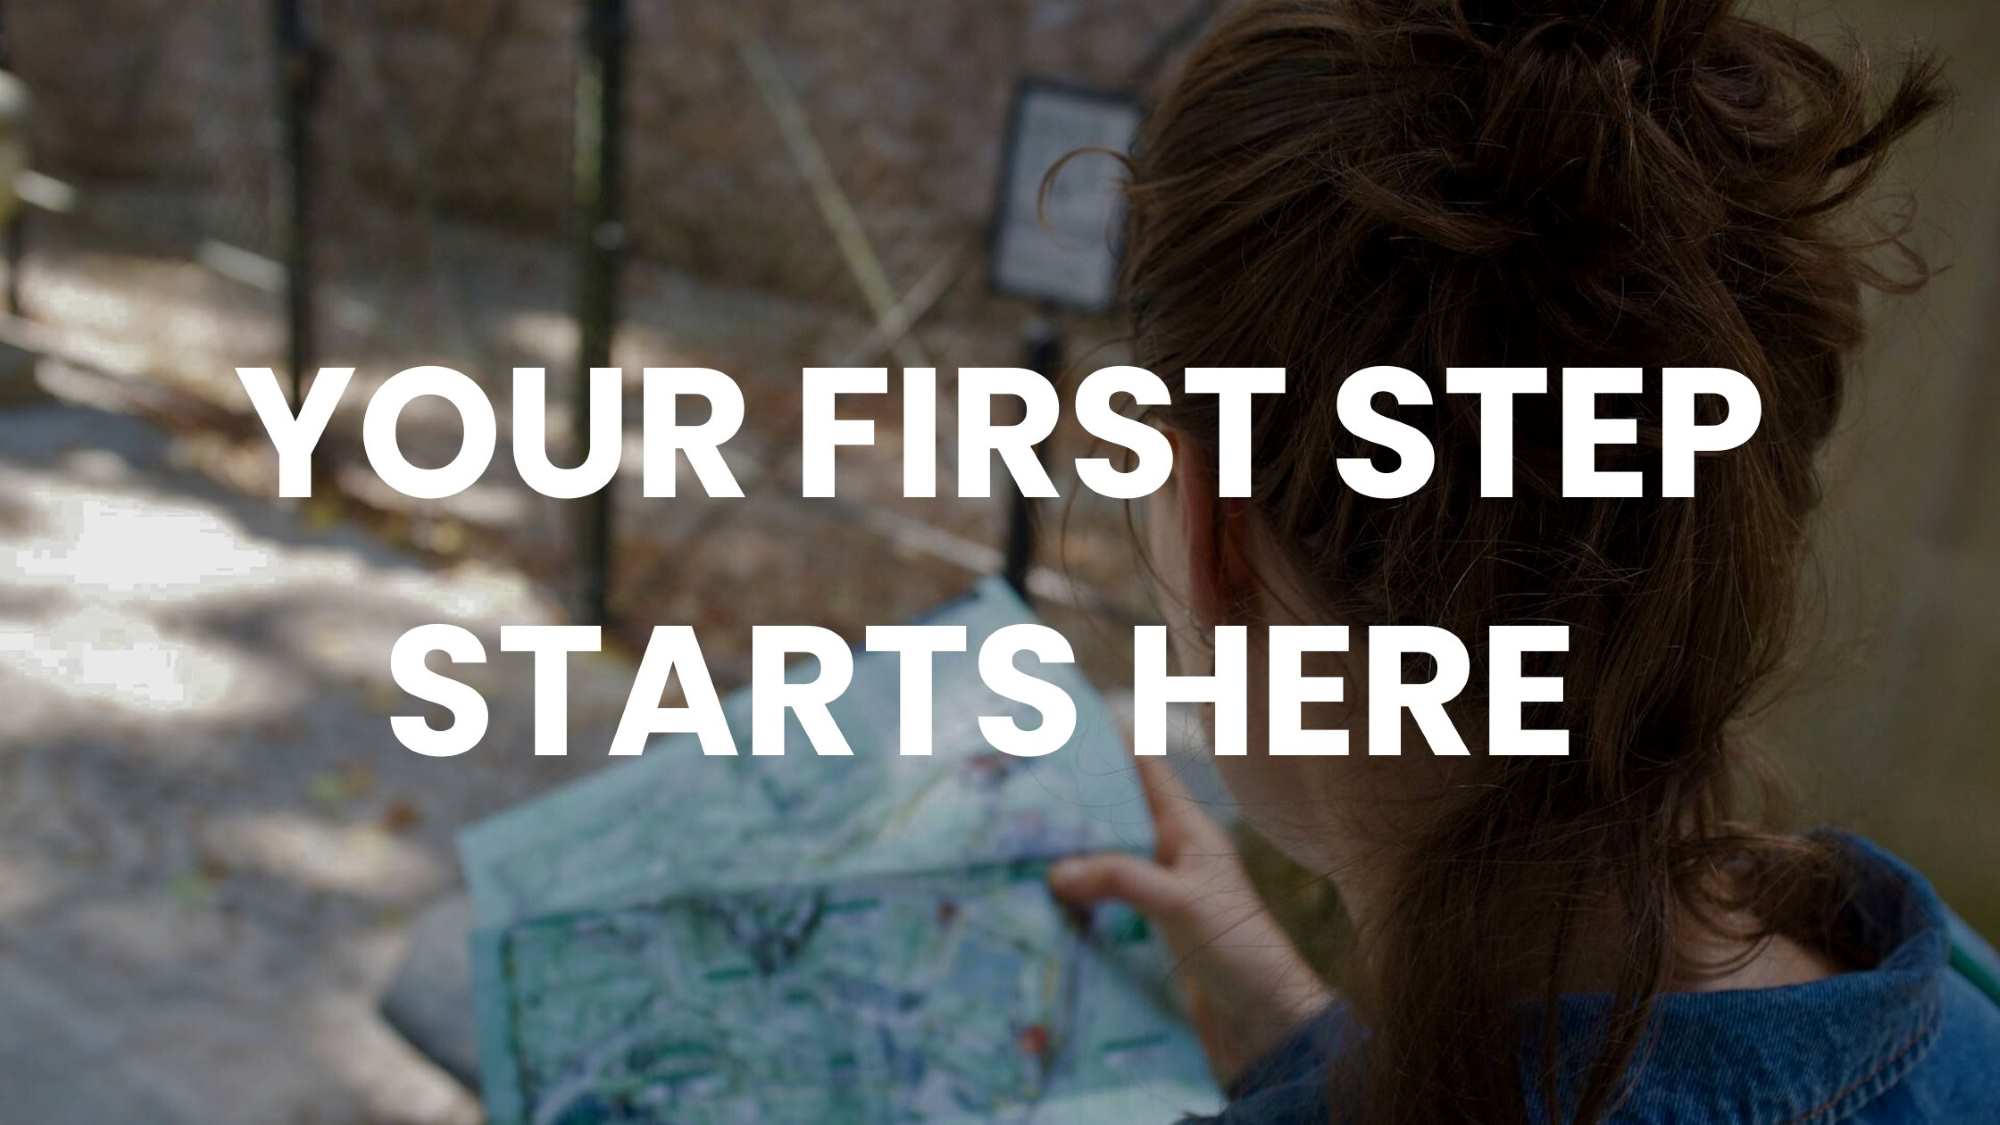 "Roadmap to dream home depicted by woman with map on path, 'YOUR FIRST STEP STARTS HERE'."